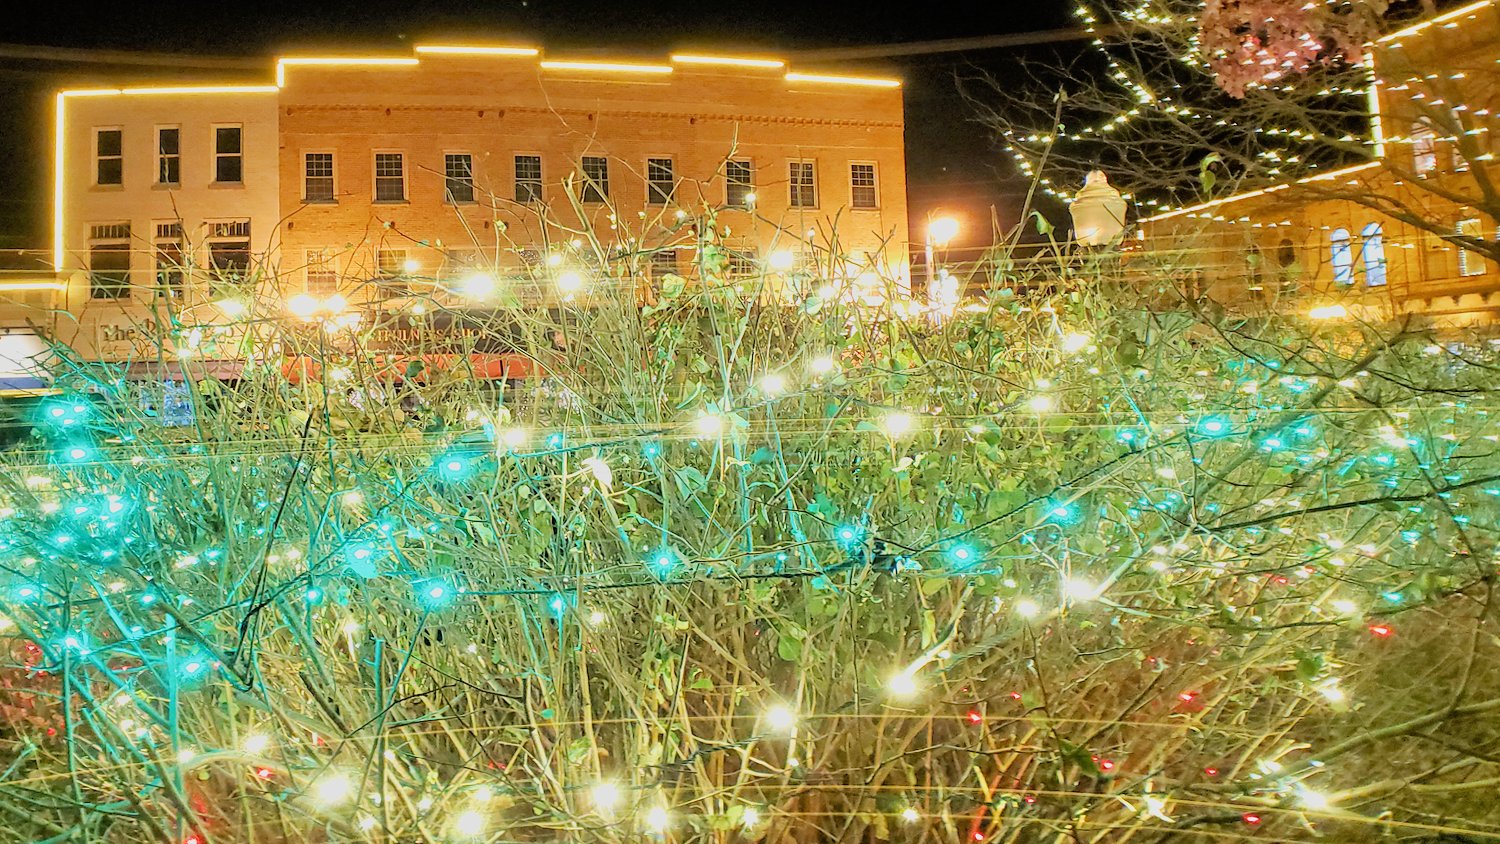 Array of lights in bushes at the Historic Square in Woodstock, IL.